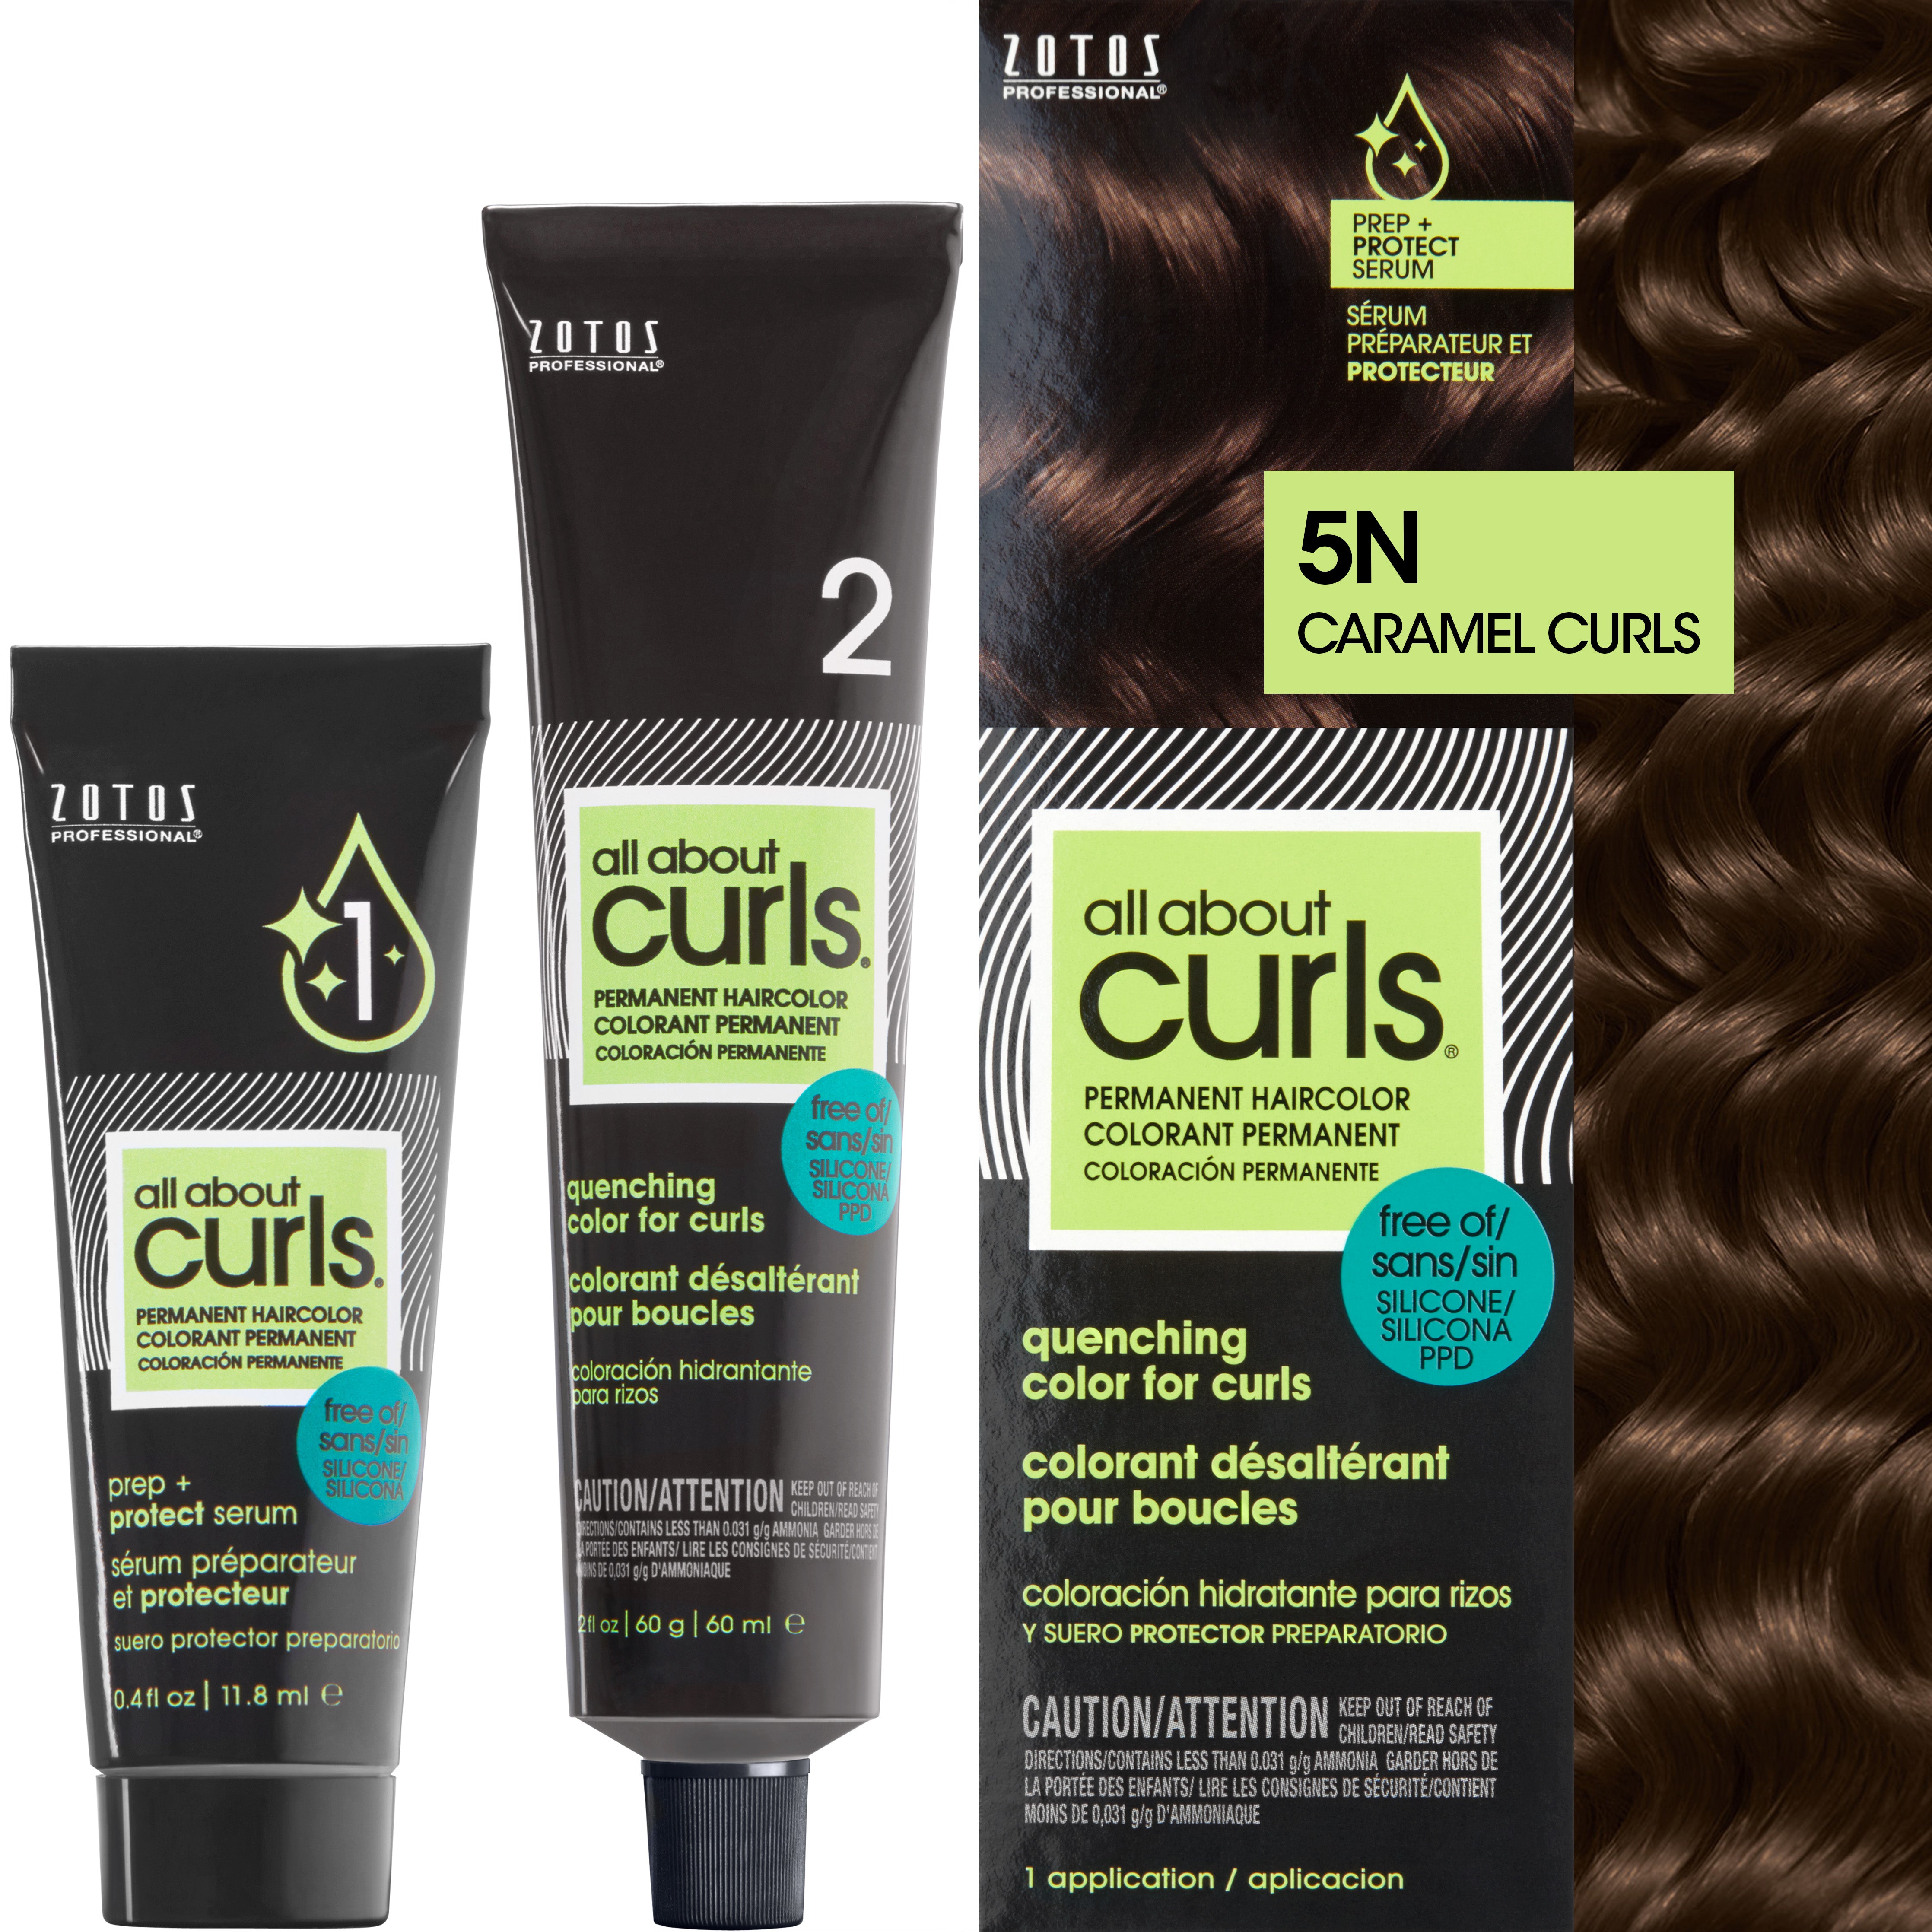 Two bottles and packaging for All About Curls Permanent Color in shade 5N Caramel Curls.